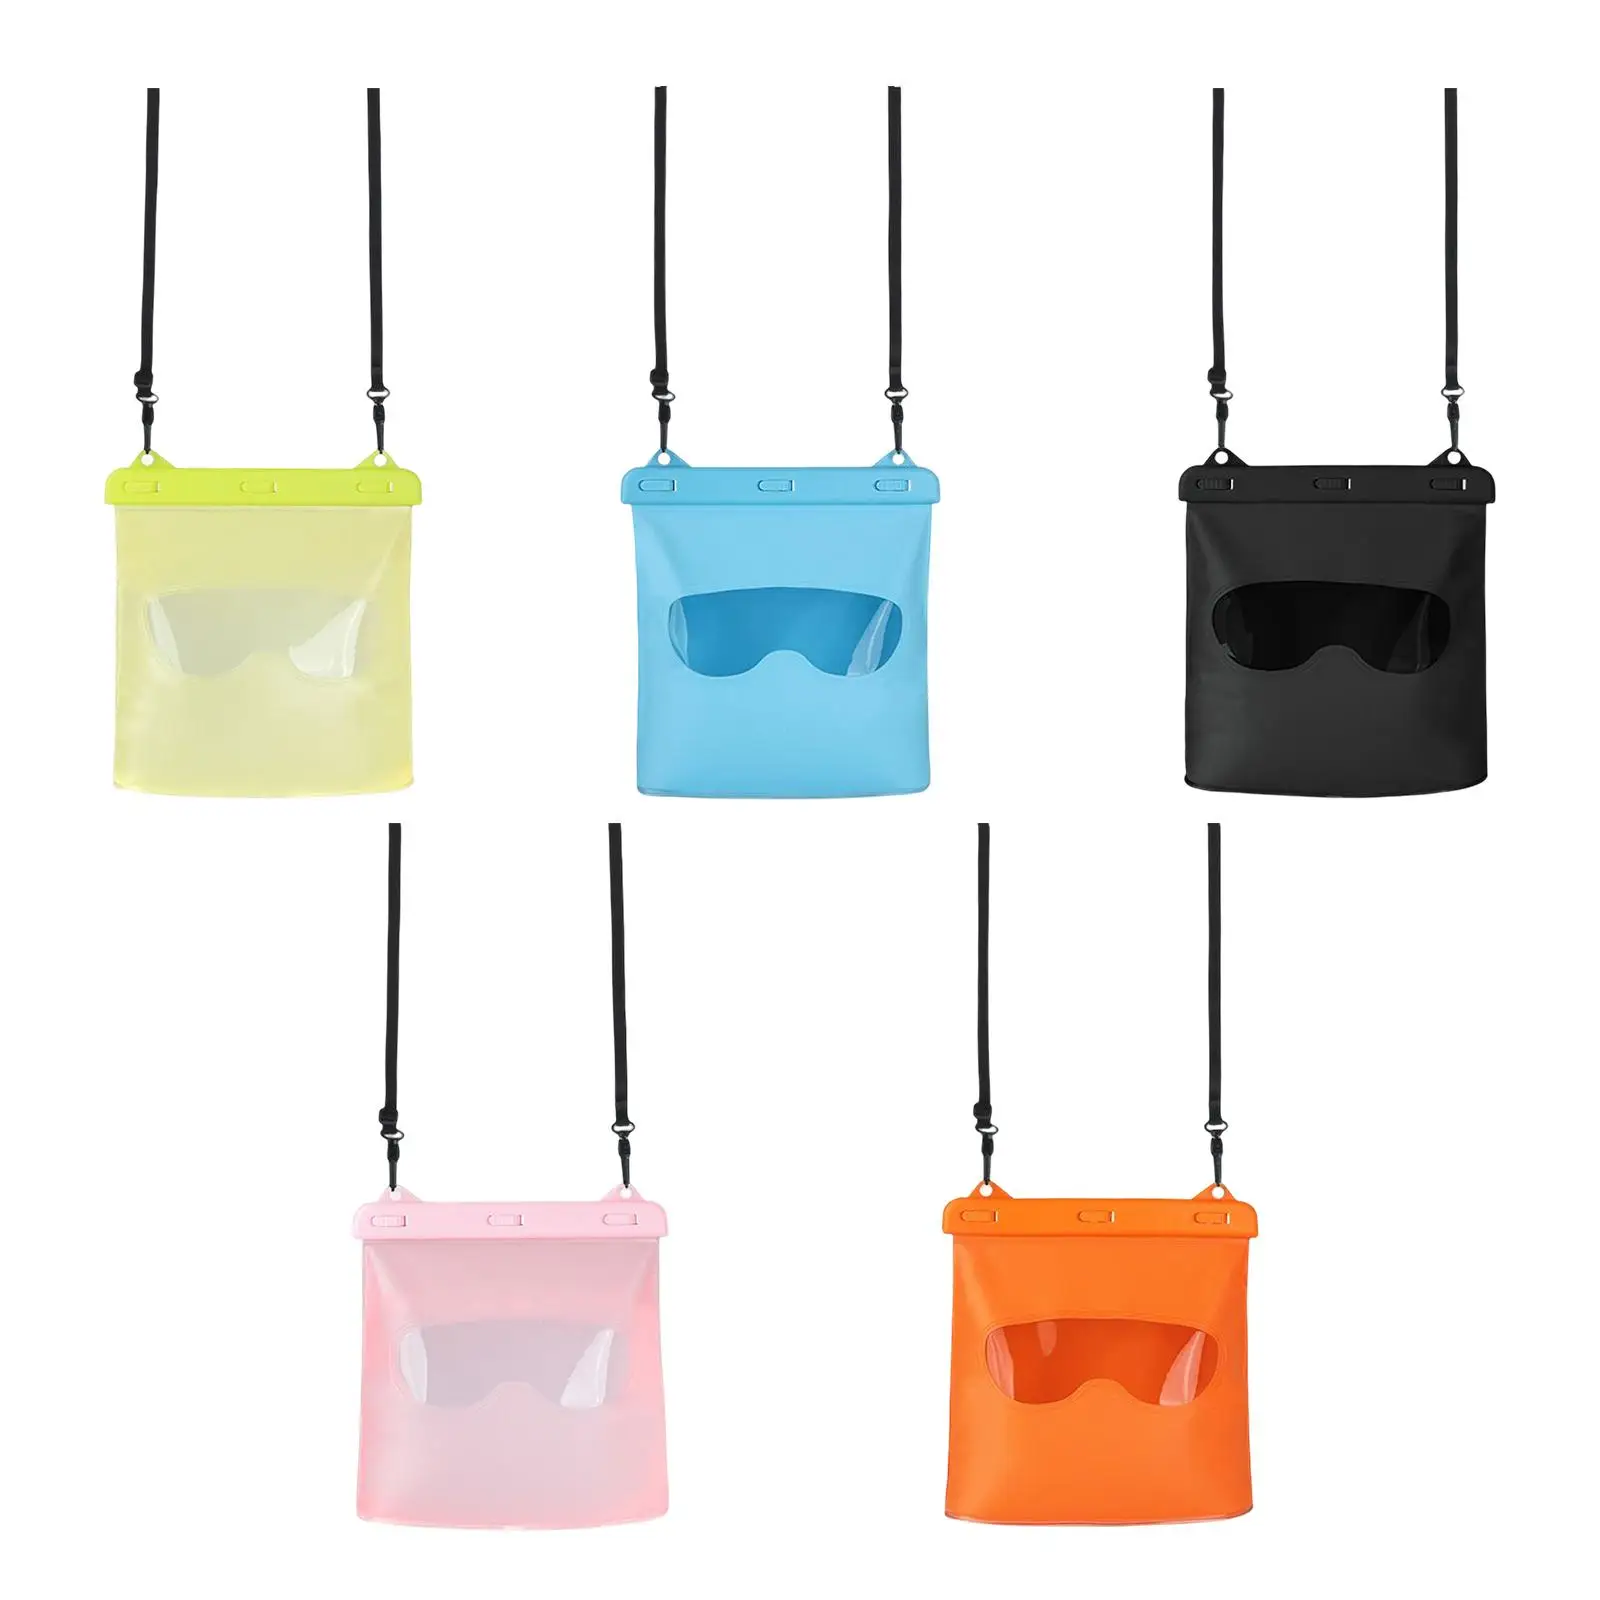 Waterproof Storage Bag Travel Perspective Practical Women Men Portable Beach Pouch Handbag for Swimming Boating Camping Fishing